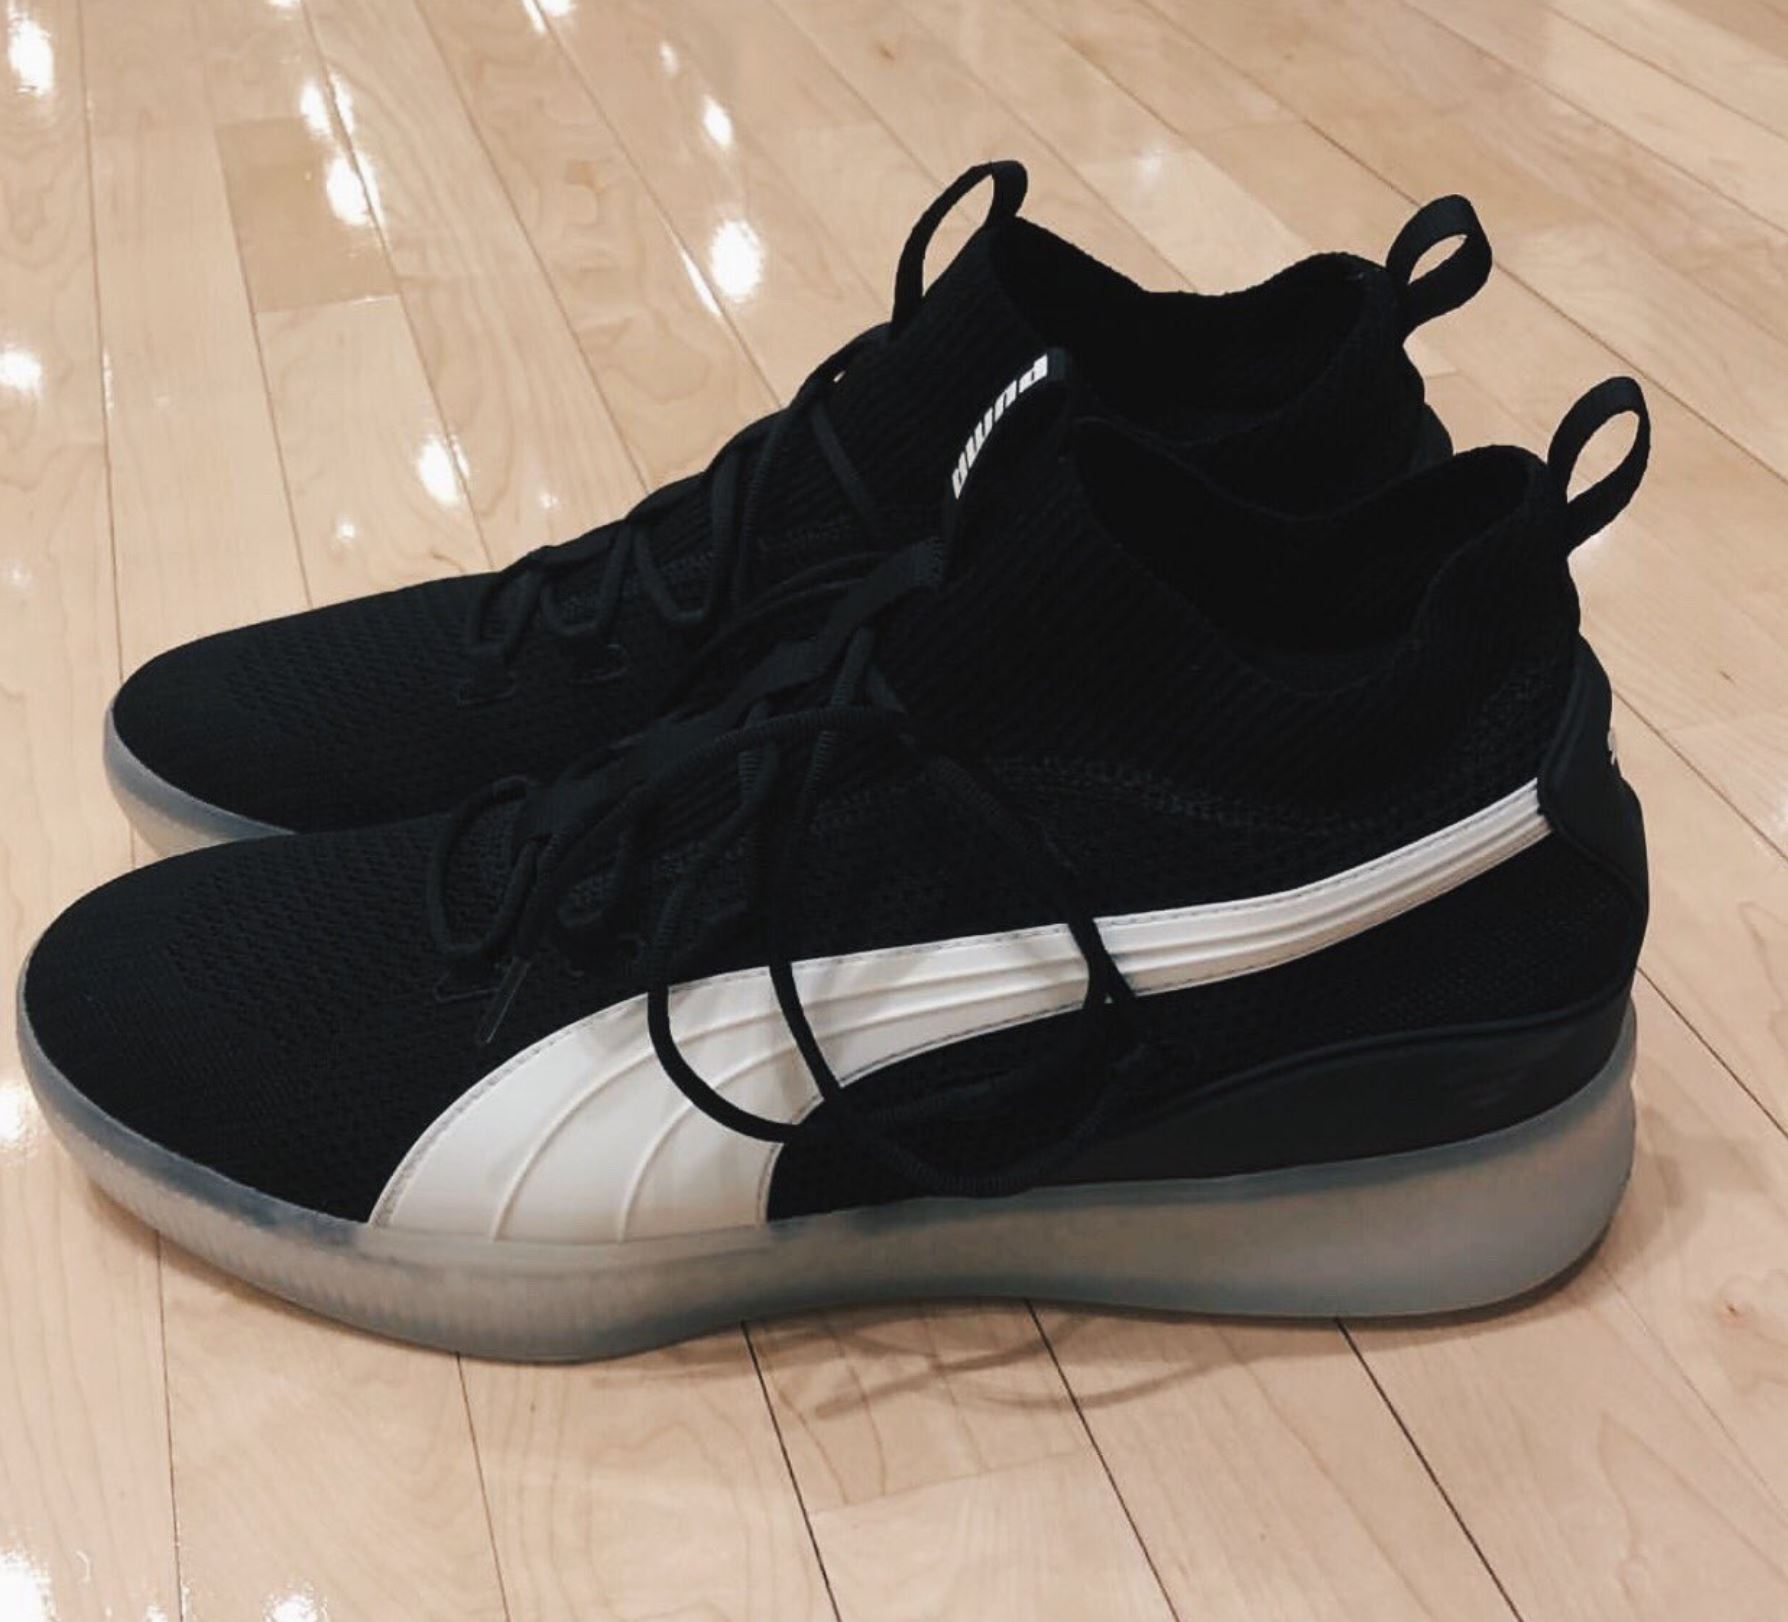 Another Colorway of the Puma Clyde Court Disrupt Has Leaked ...